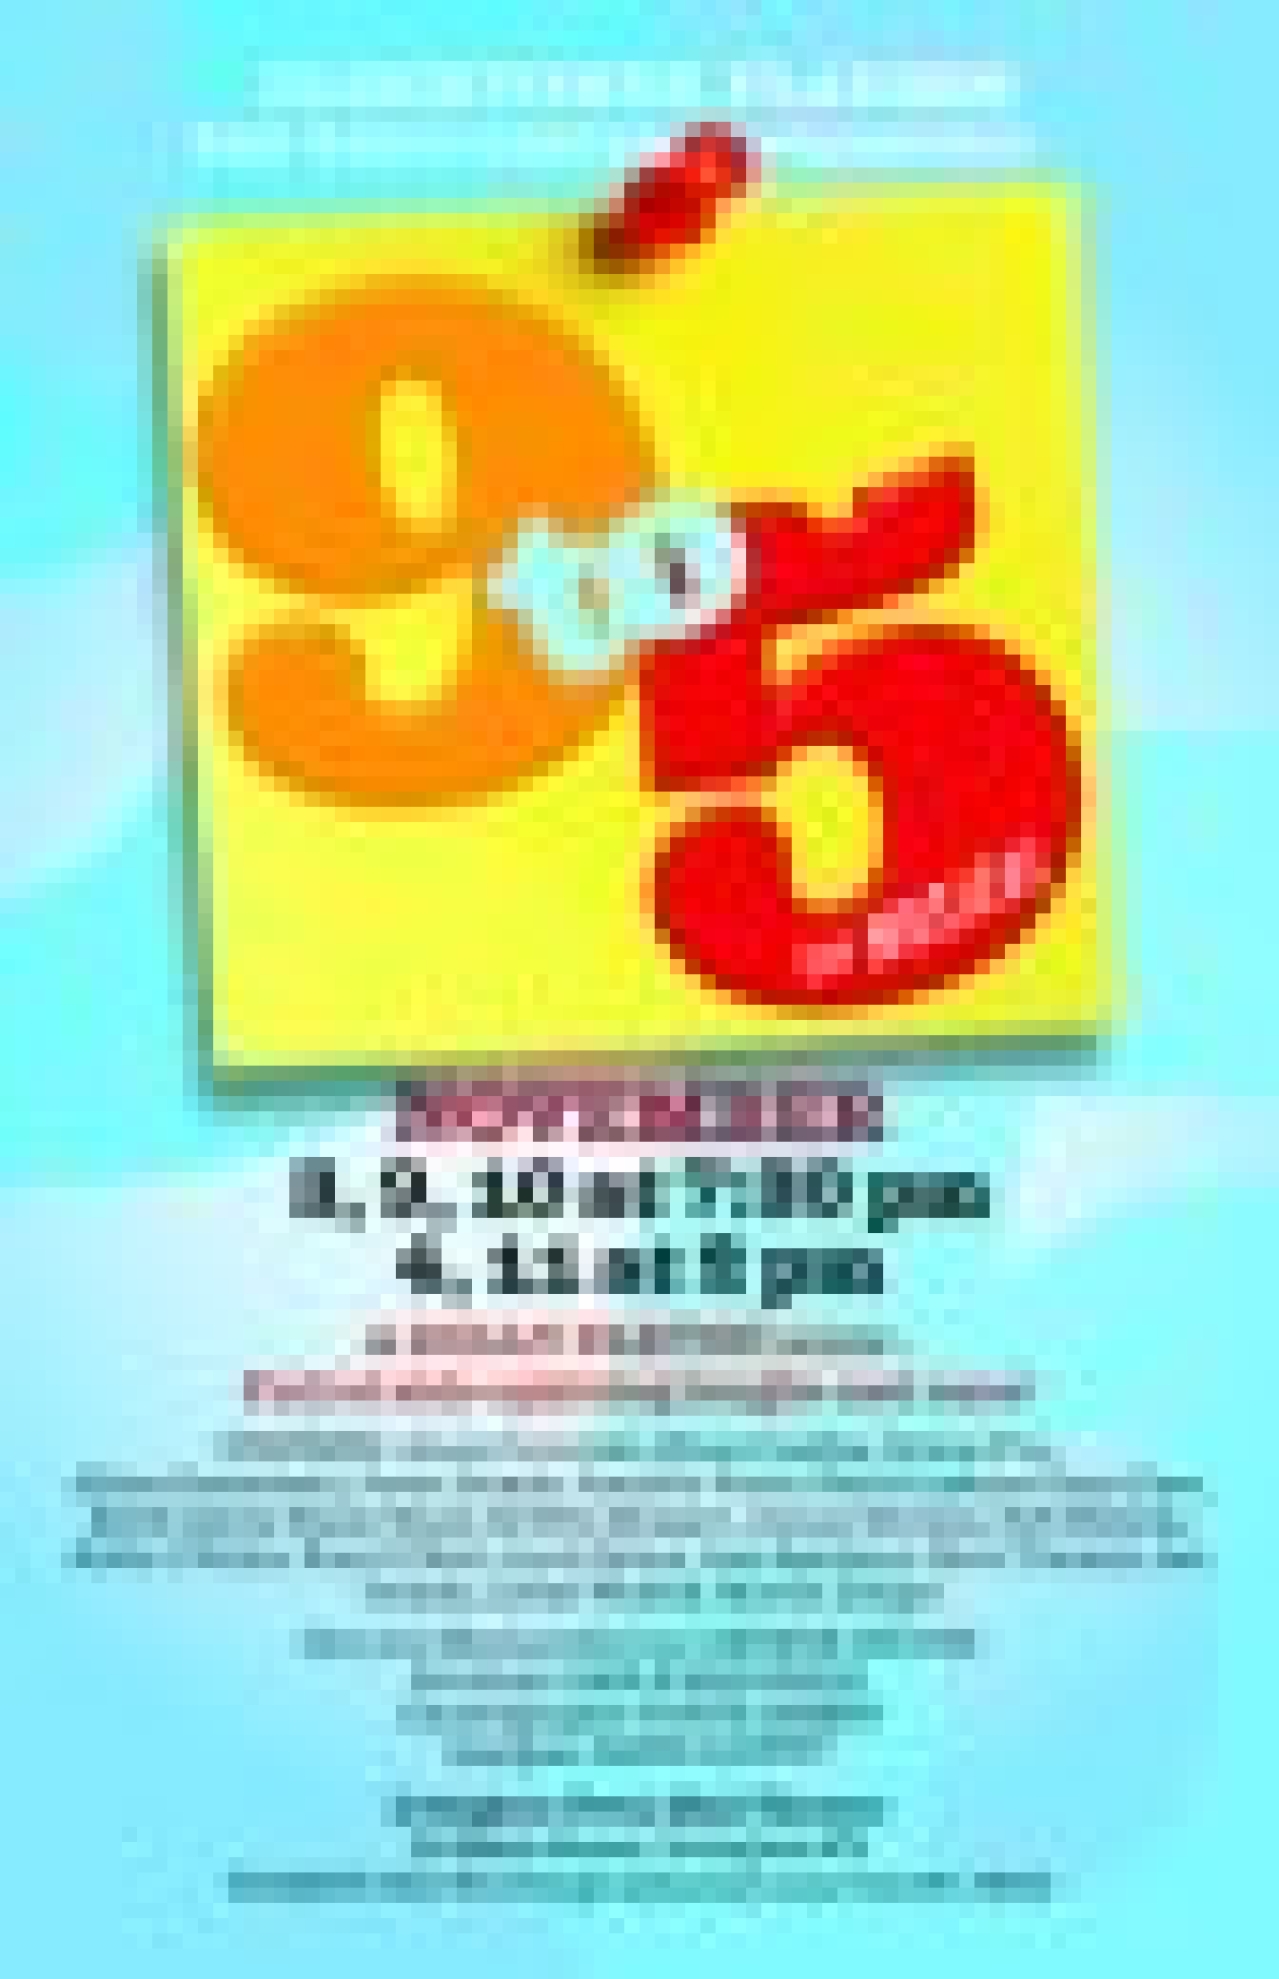 9 to 5 the musical logo 6464